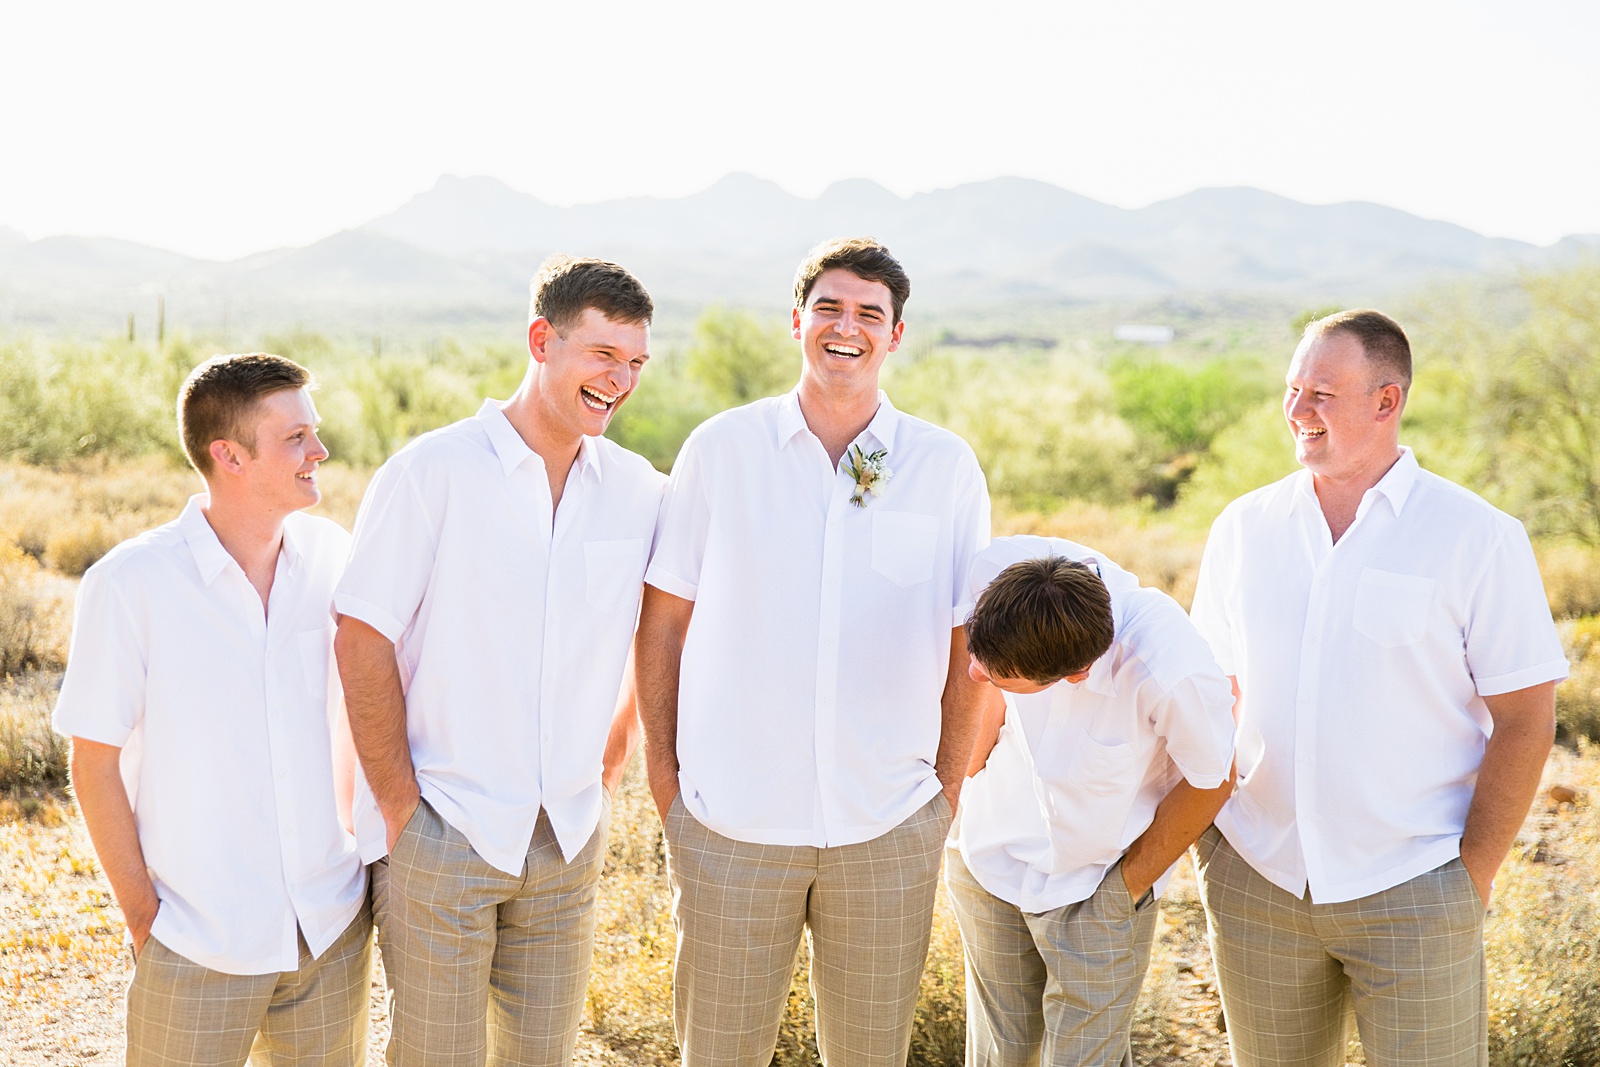 Groom and groomsmen laughing together at Superstition Mountain Micro wedding by Lost Dutchman wedding photographer PMA Photography.